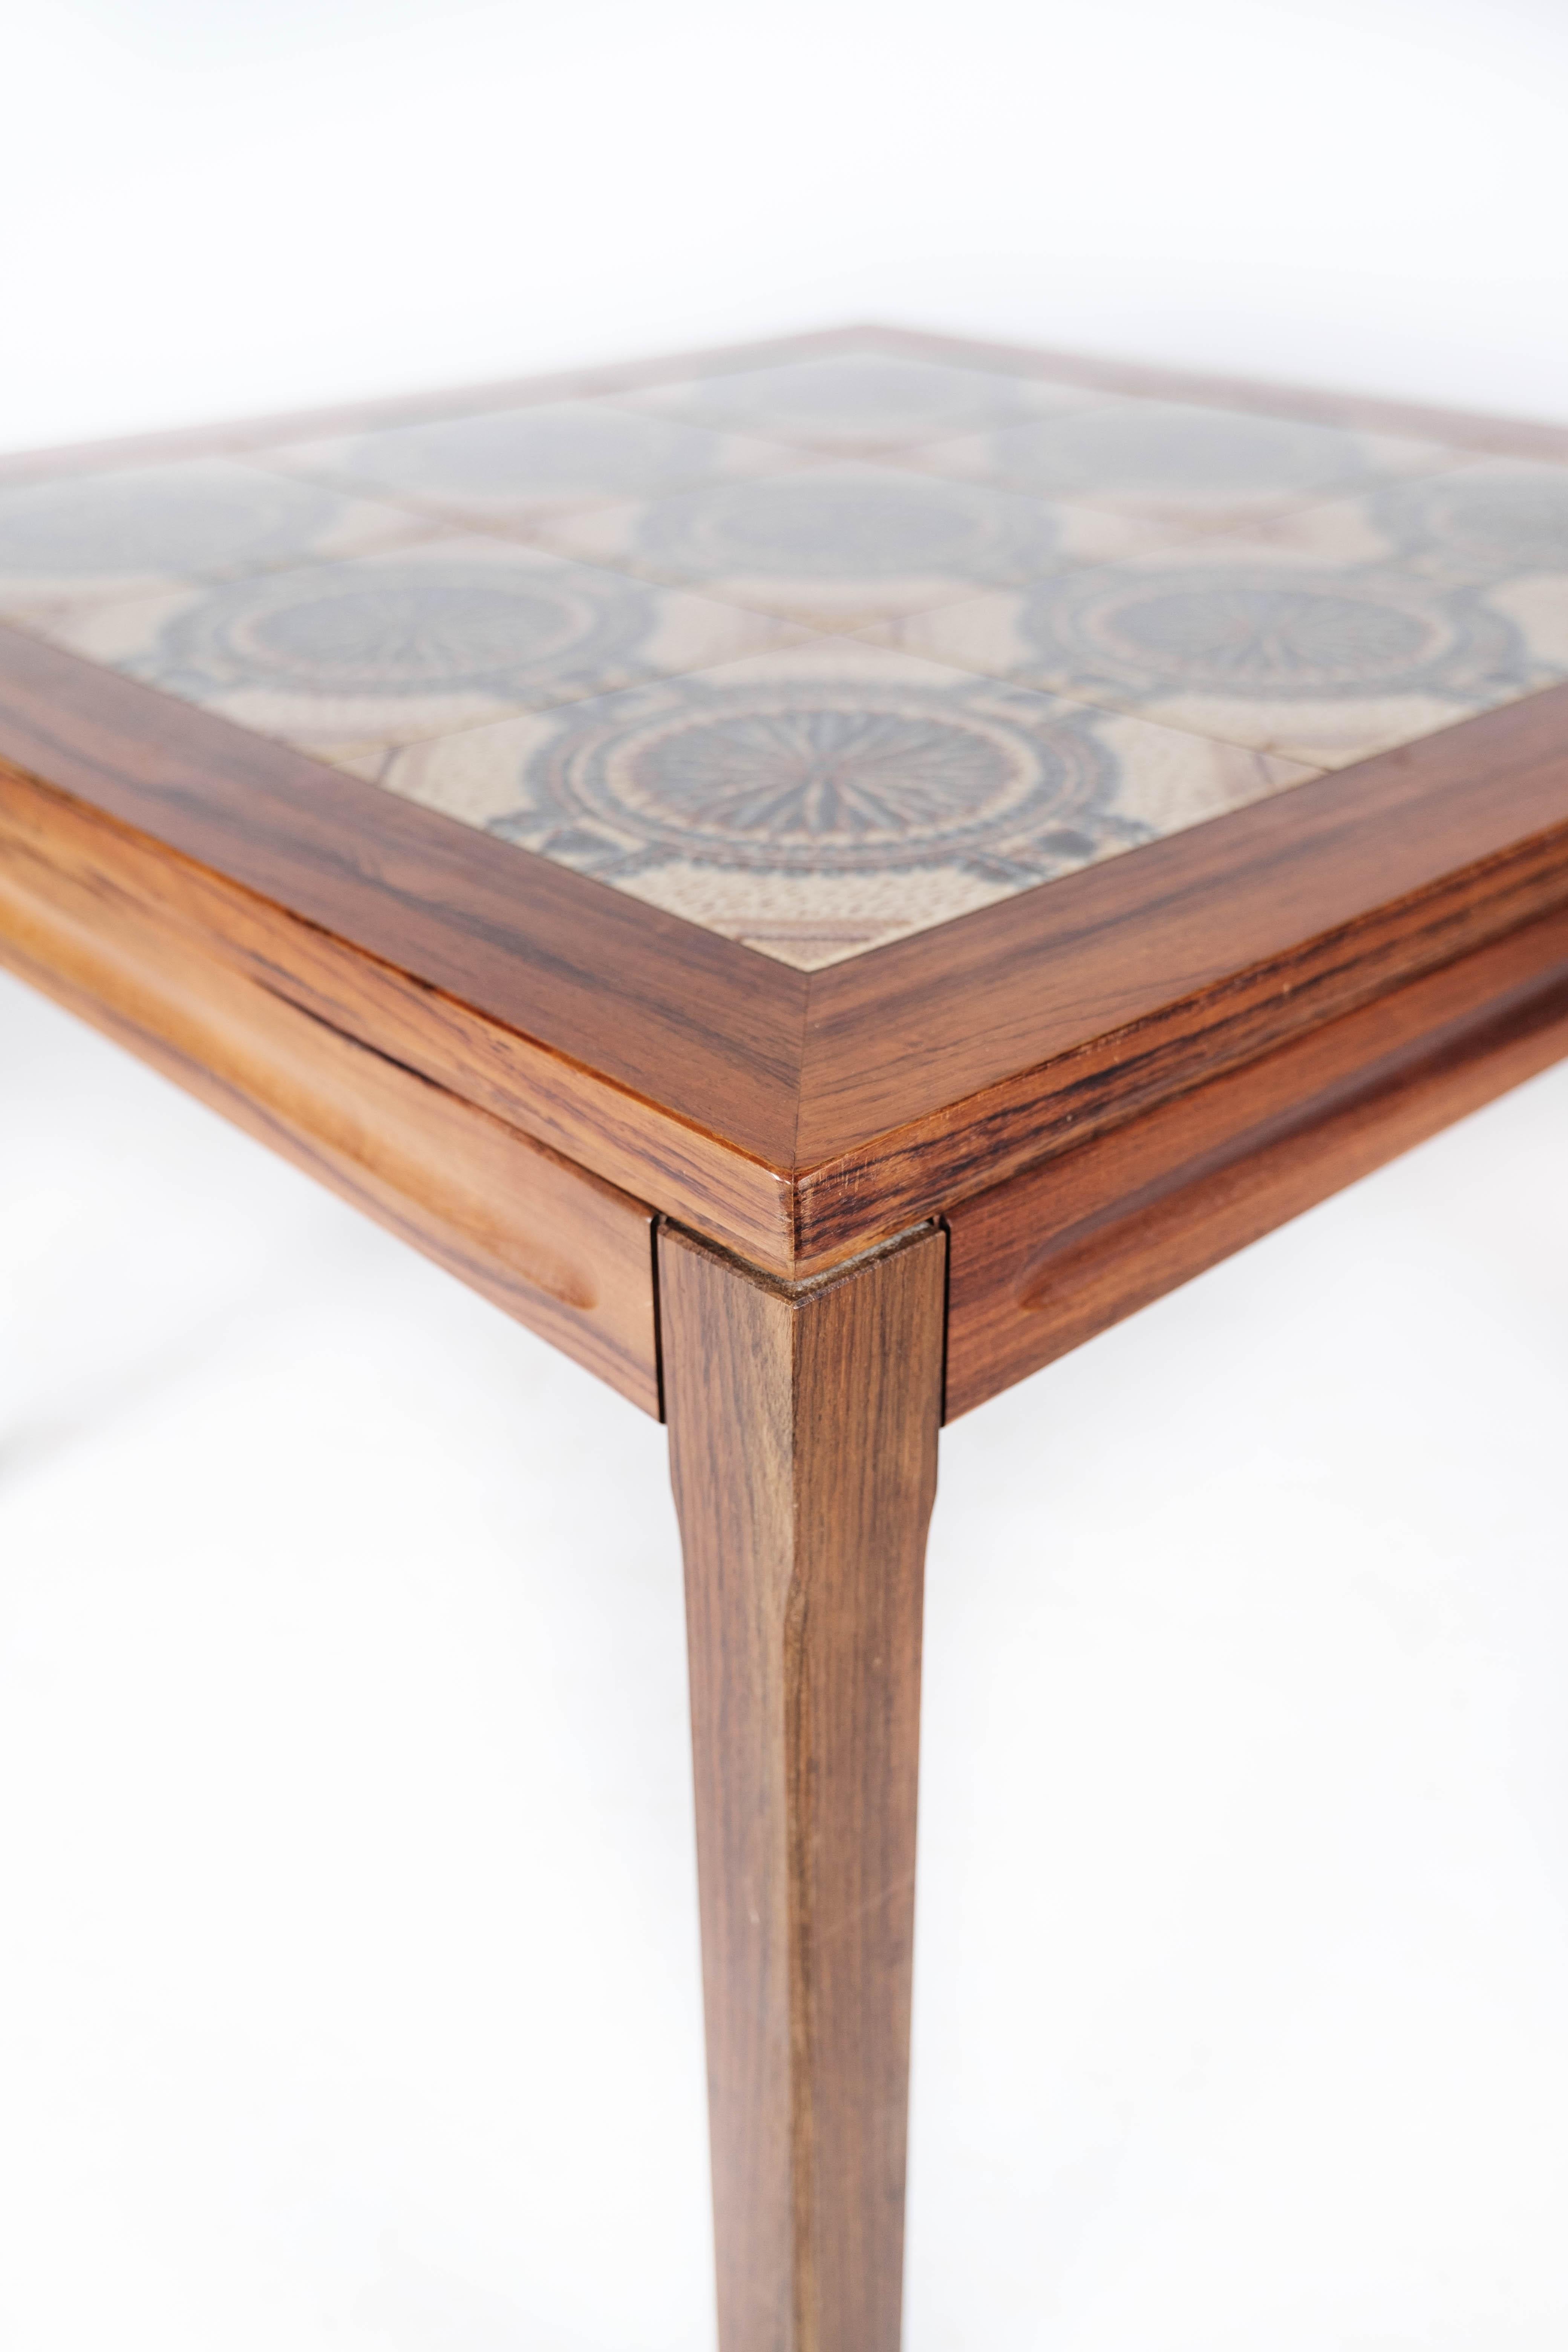 Ceramic Coffee Table Made In Rosewood With Tiles In The Table Top From 1960s For Sale